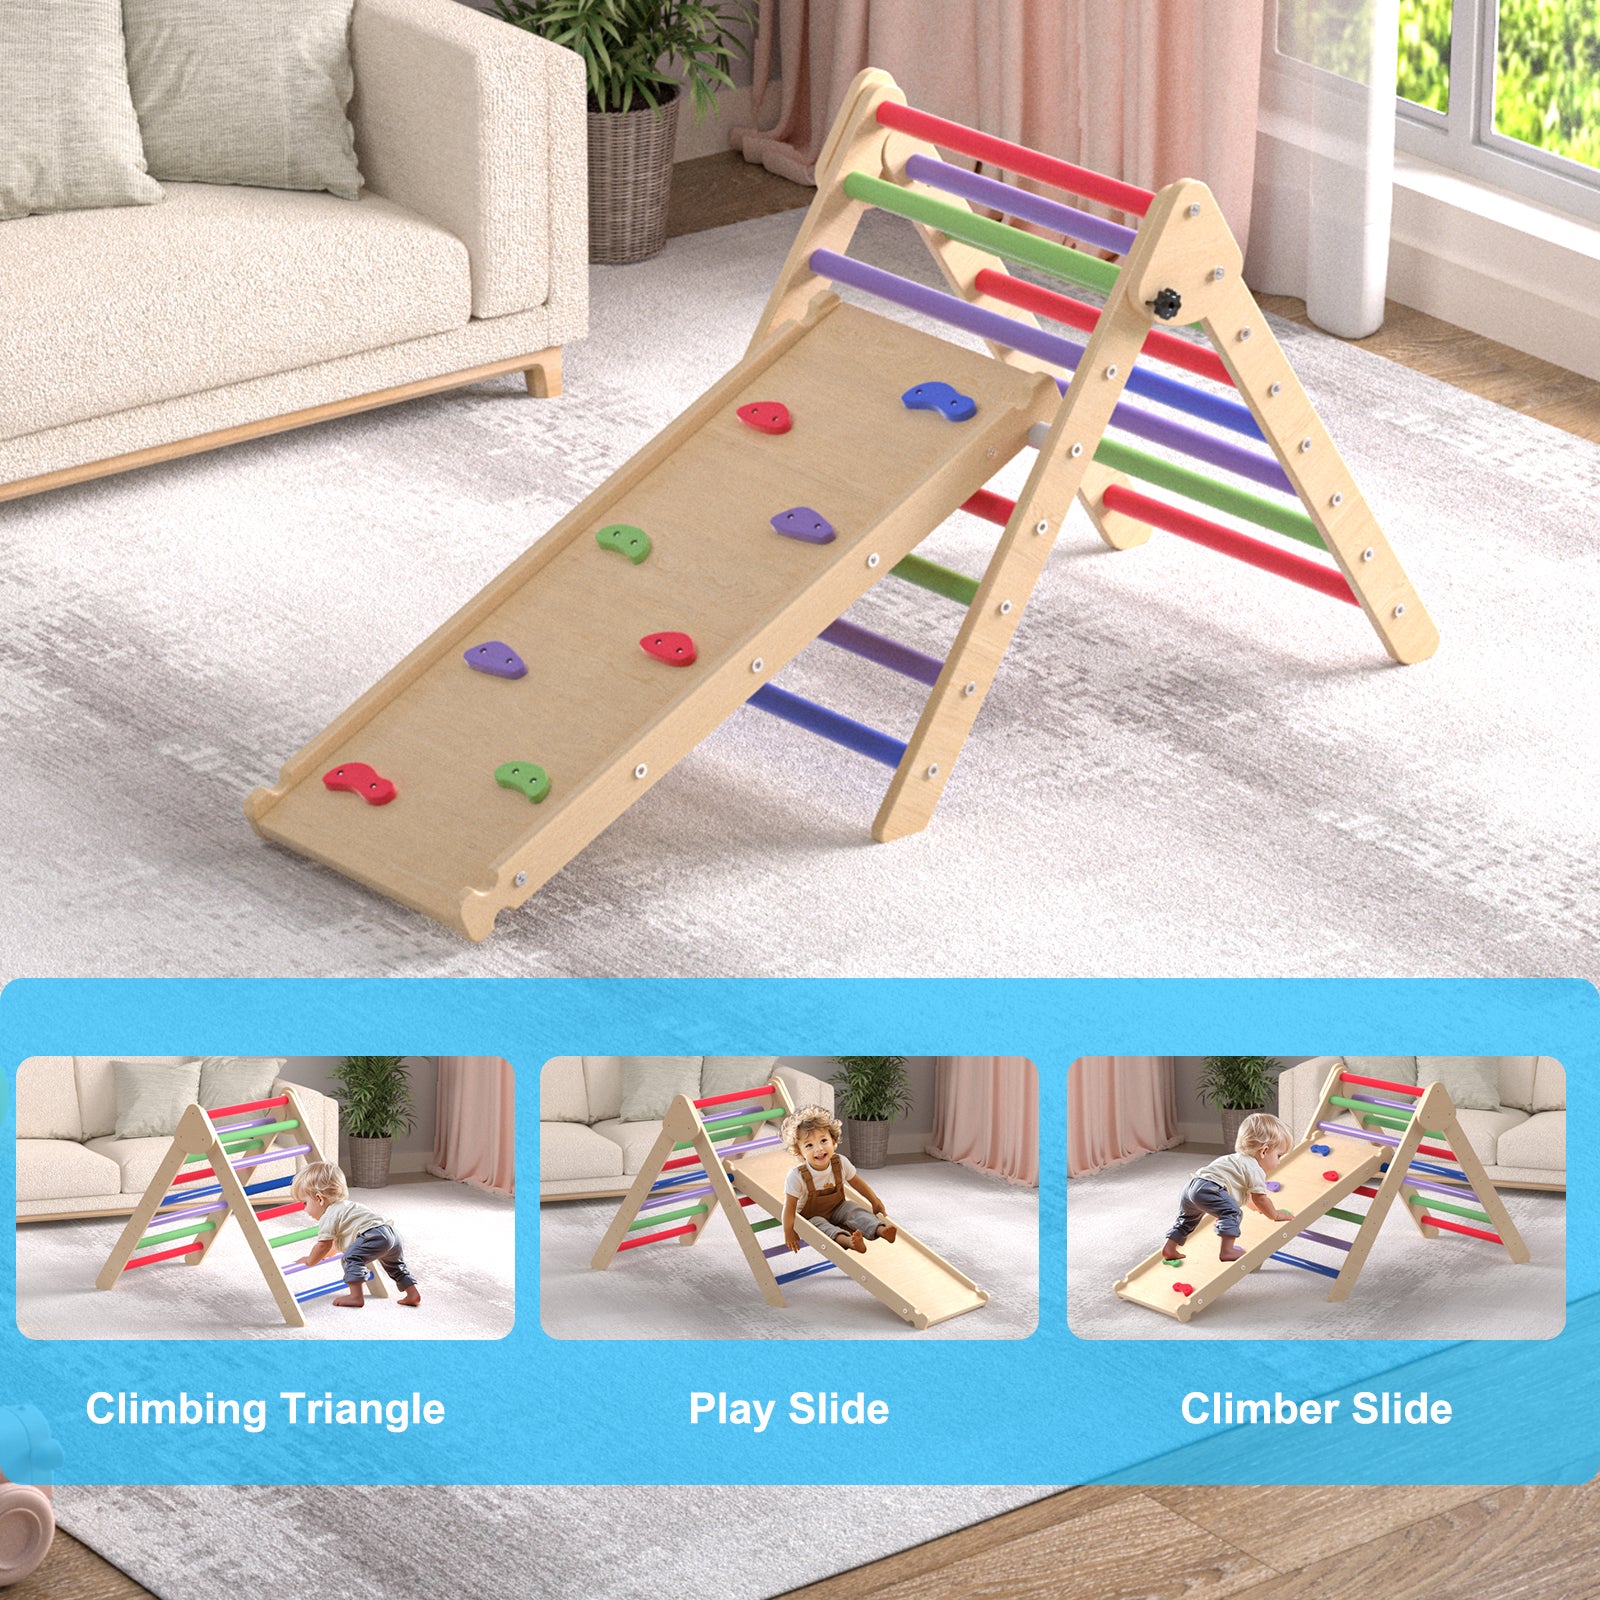 XJD 4 in 1 Wood Climber Play Set Colorful In Stock USA